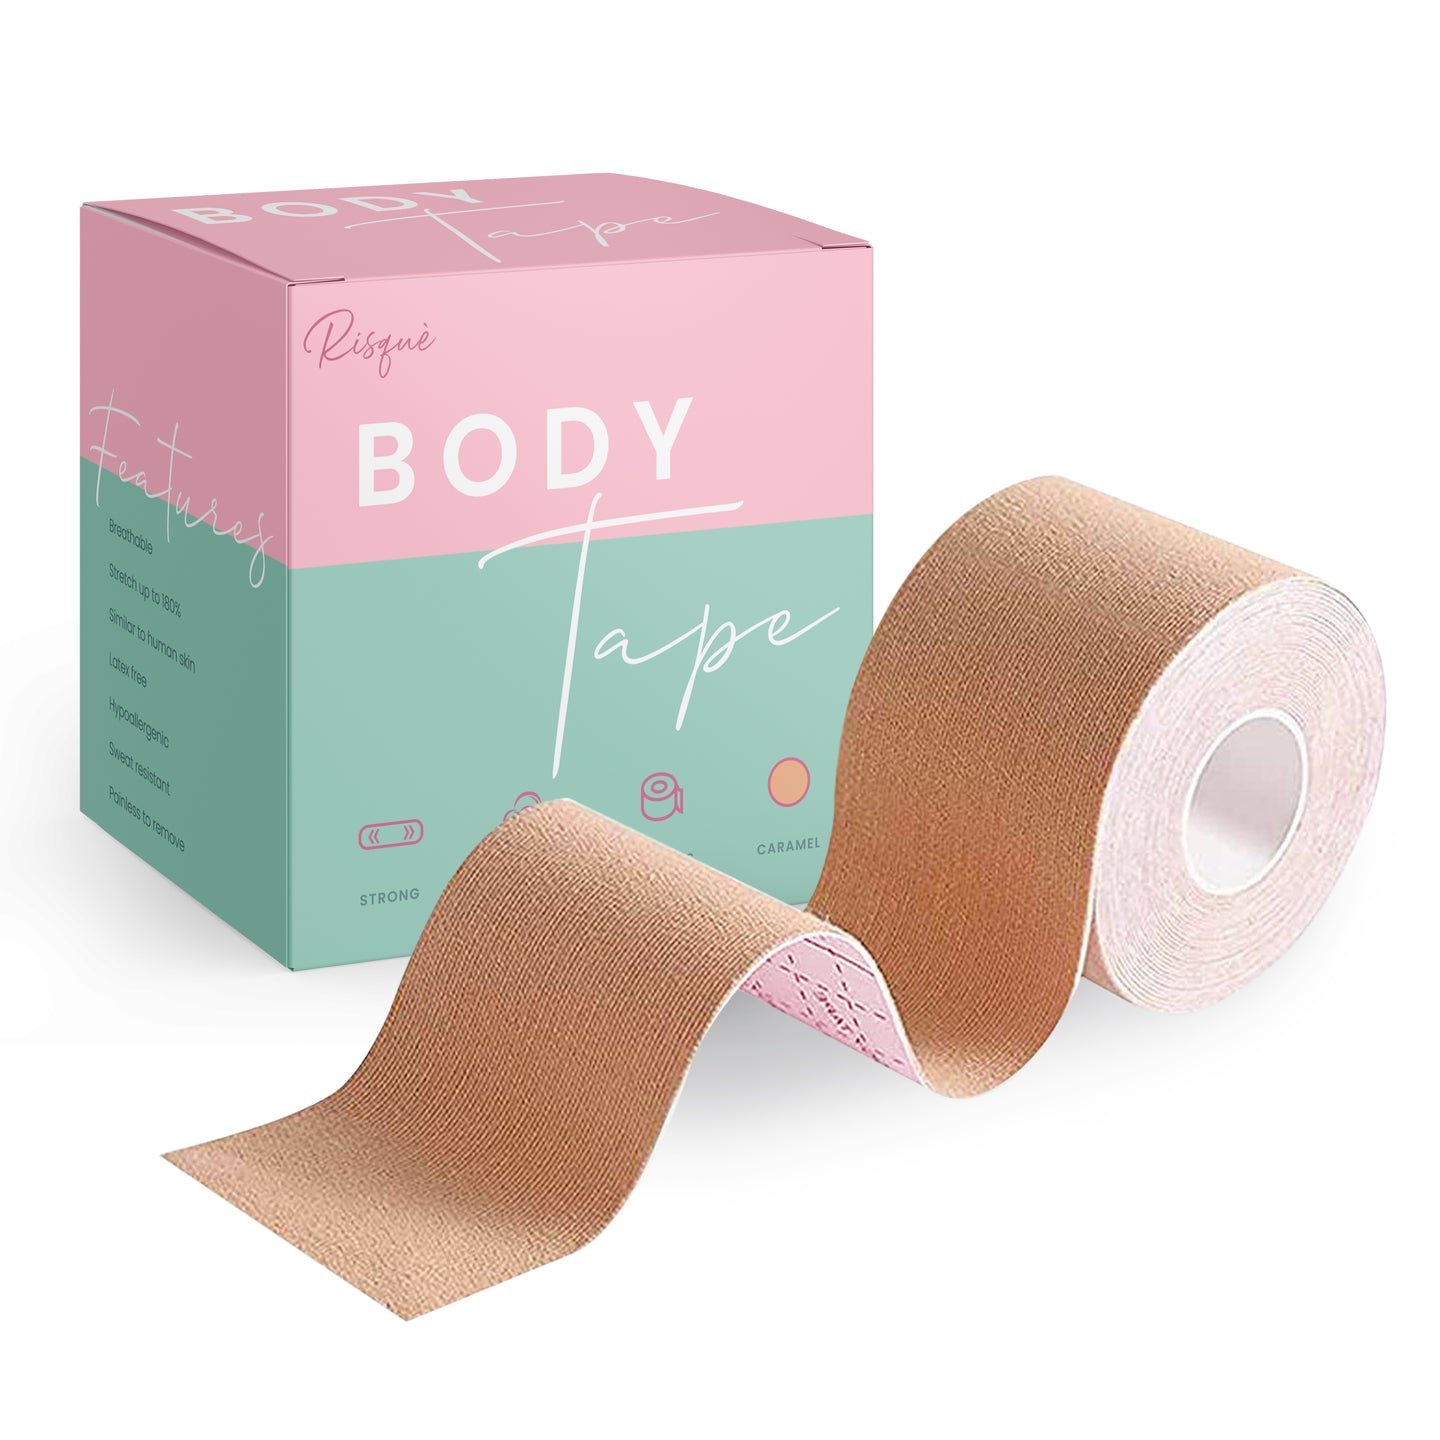 The quickest boob tape application for 36DD's! 